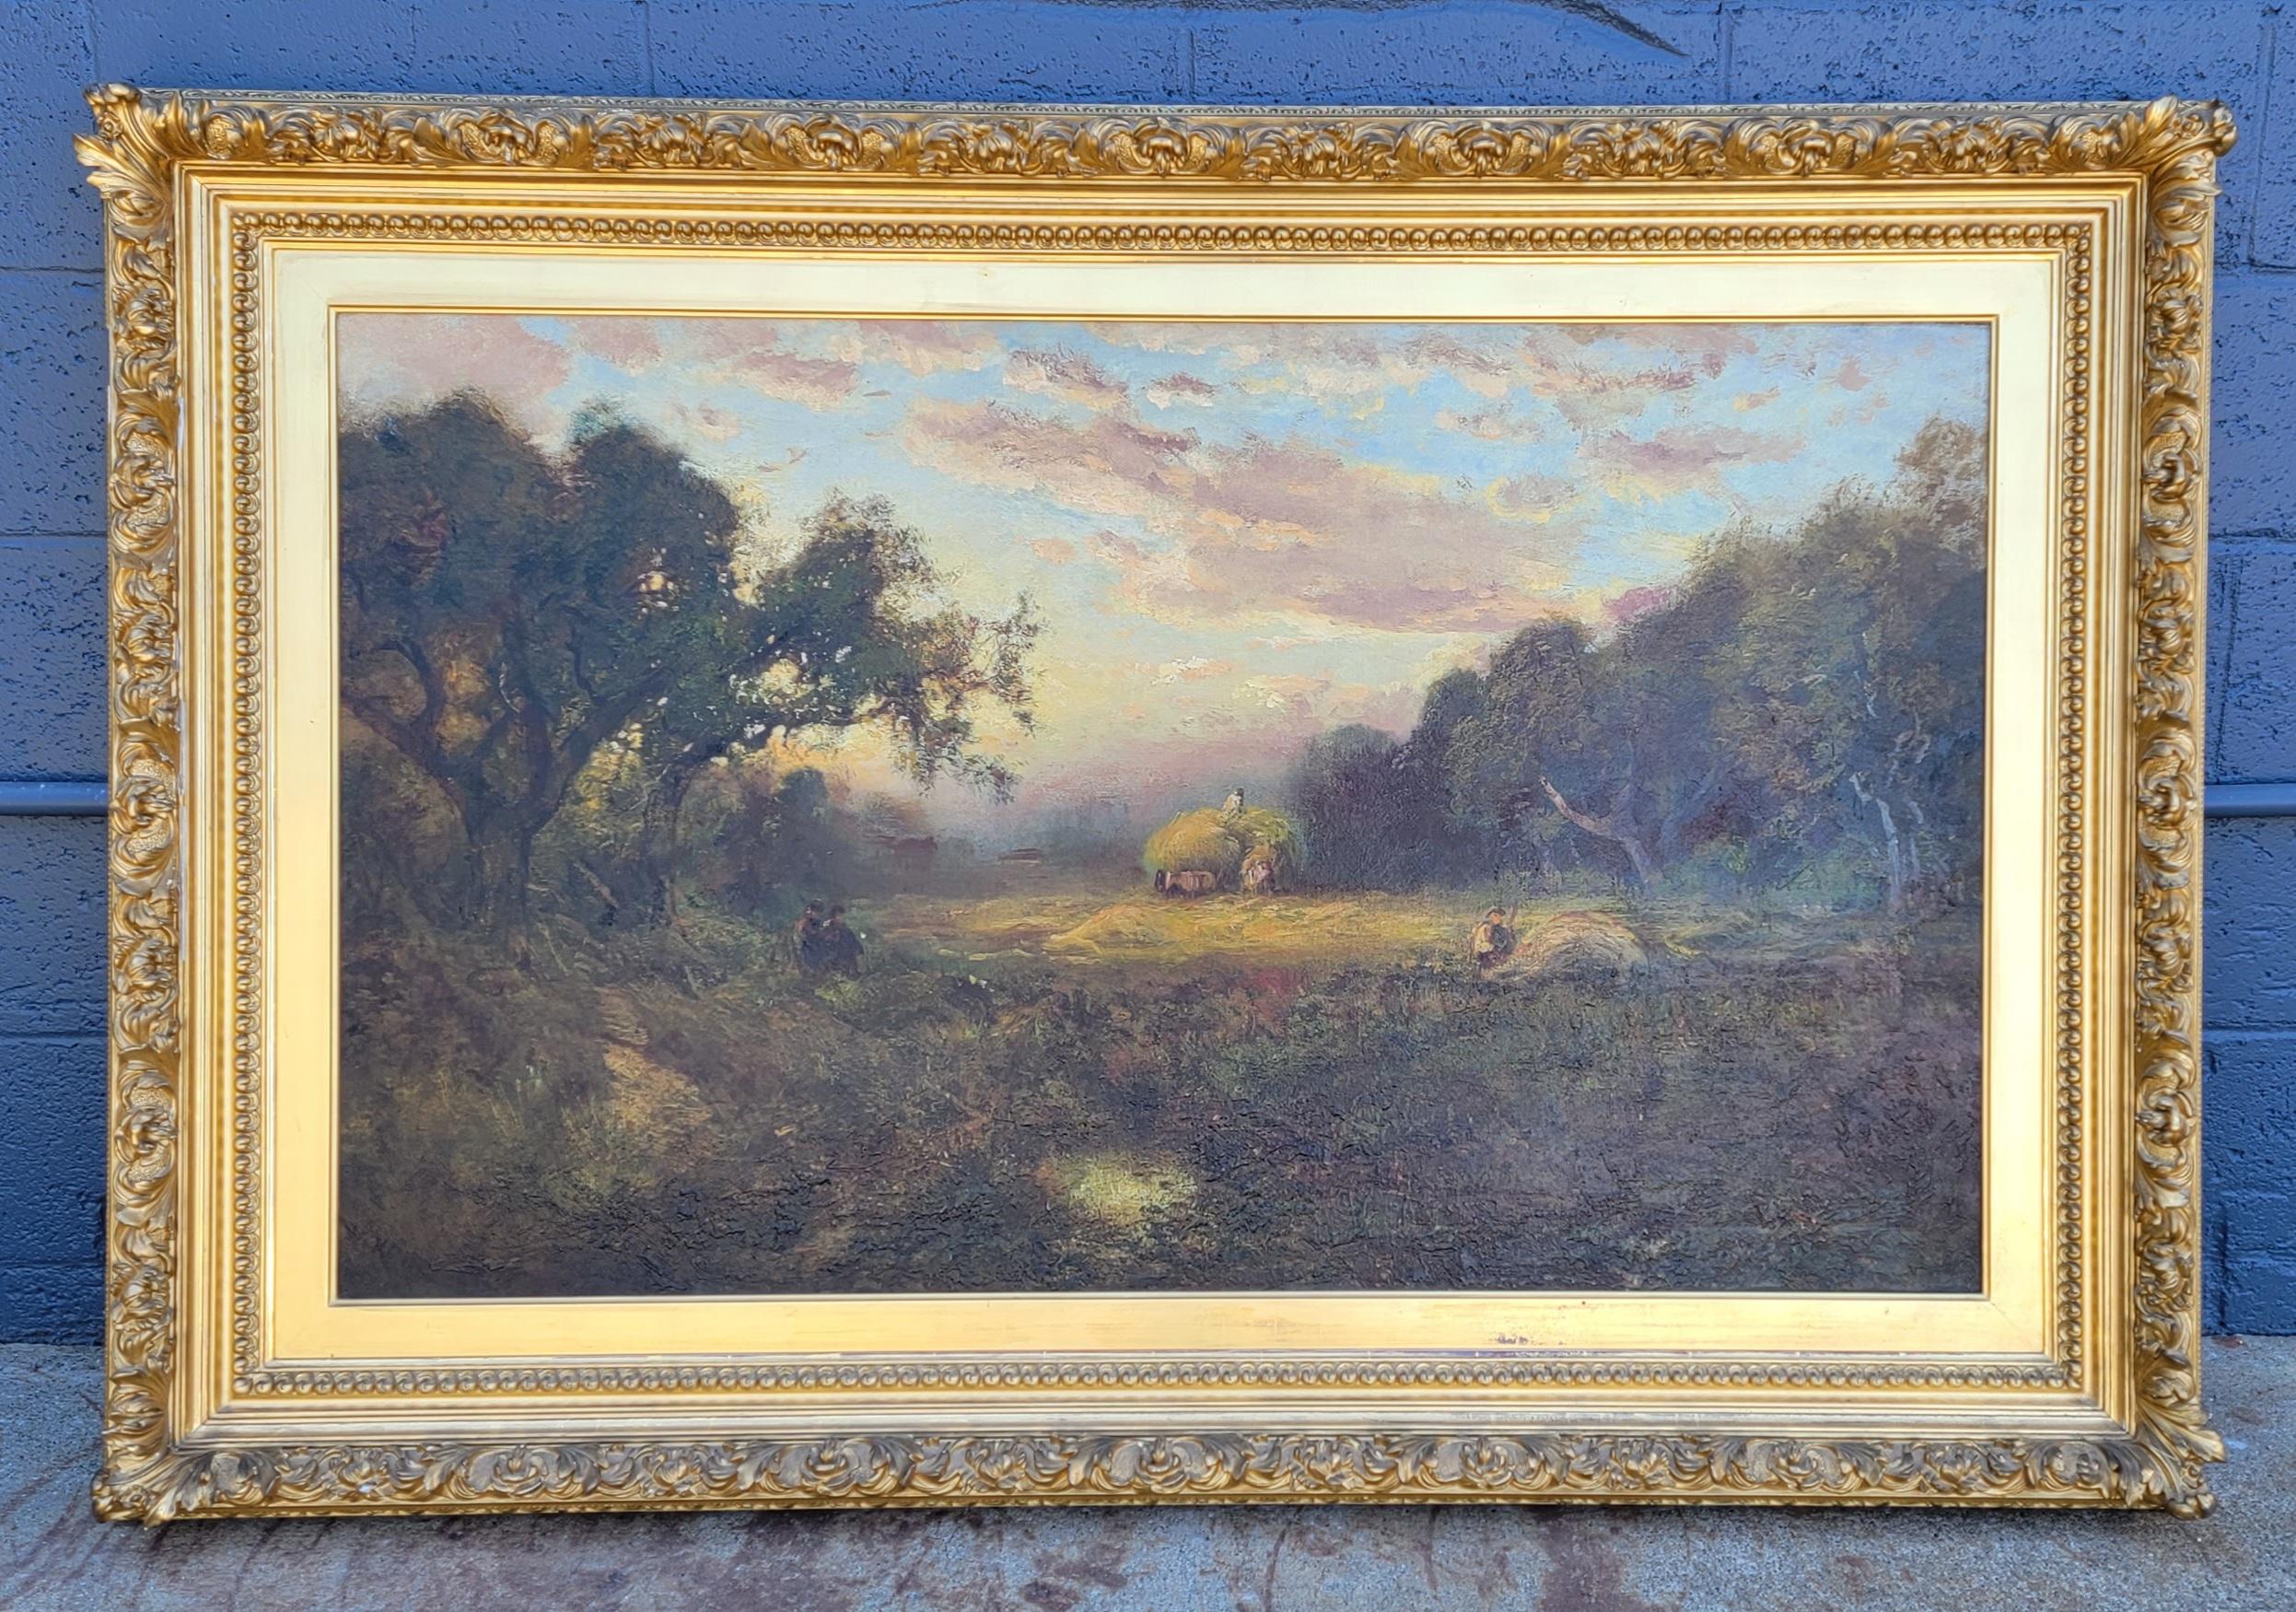 Exceptional 19th century landscape painting by Important American artist William Keith. Titled 